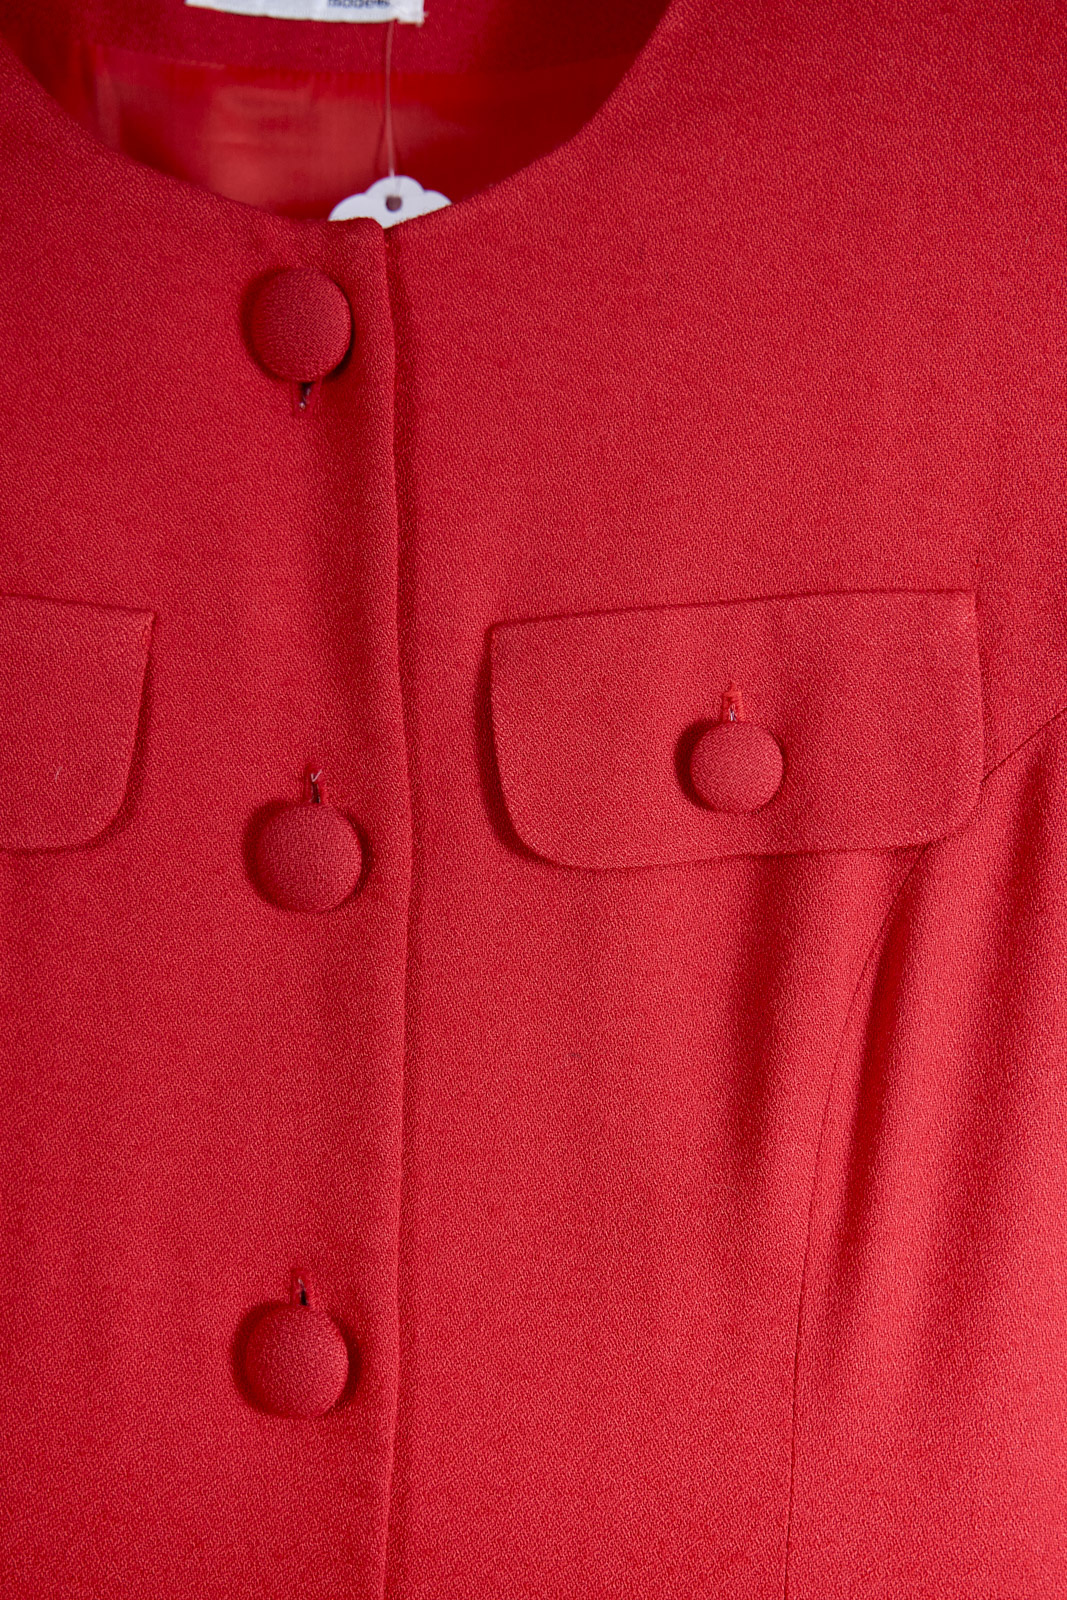 Depeche Red Dress with Buttons